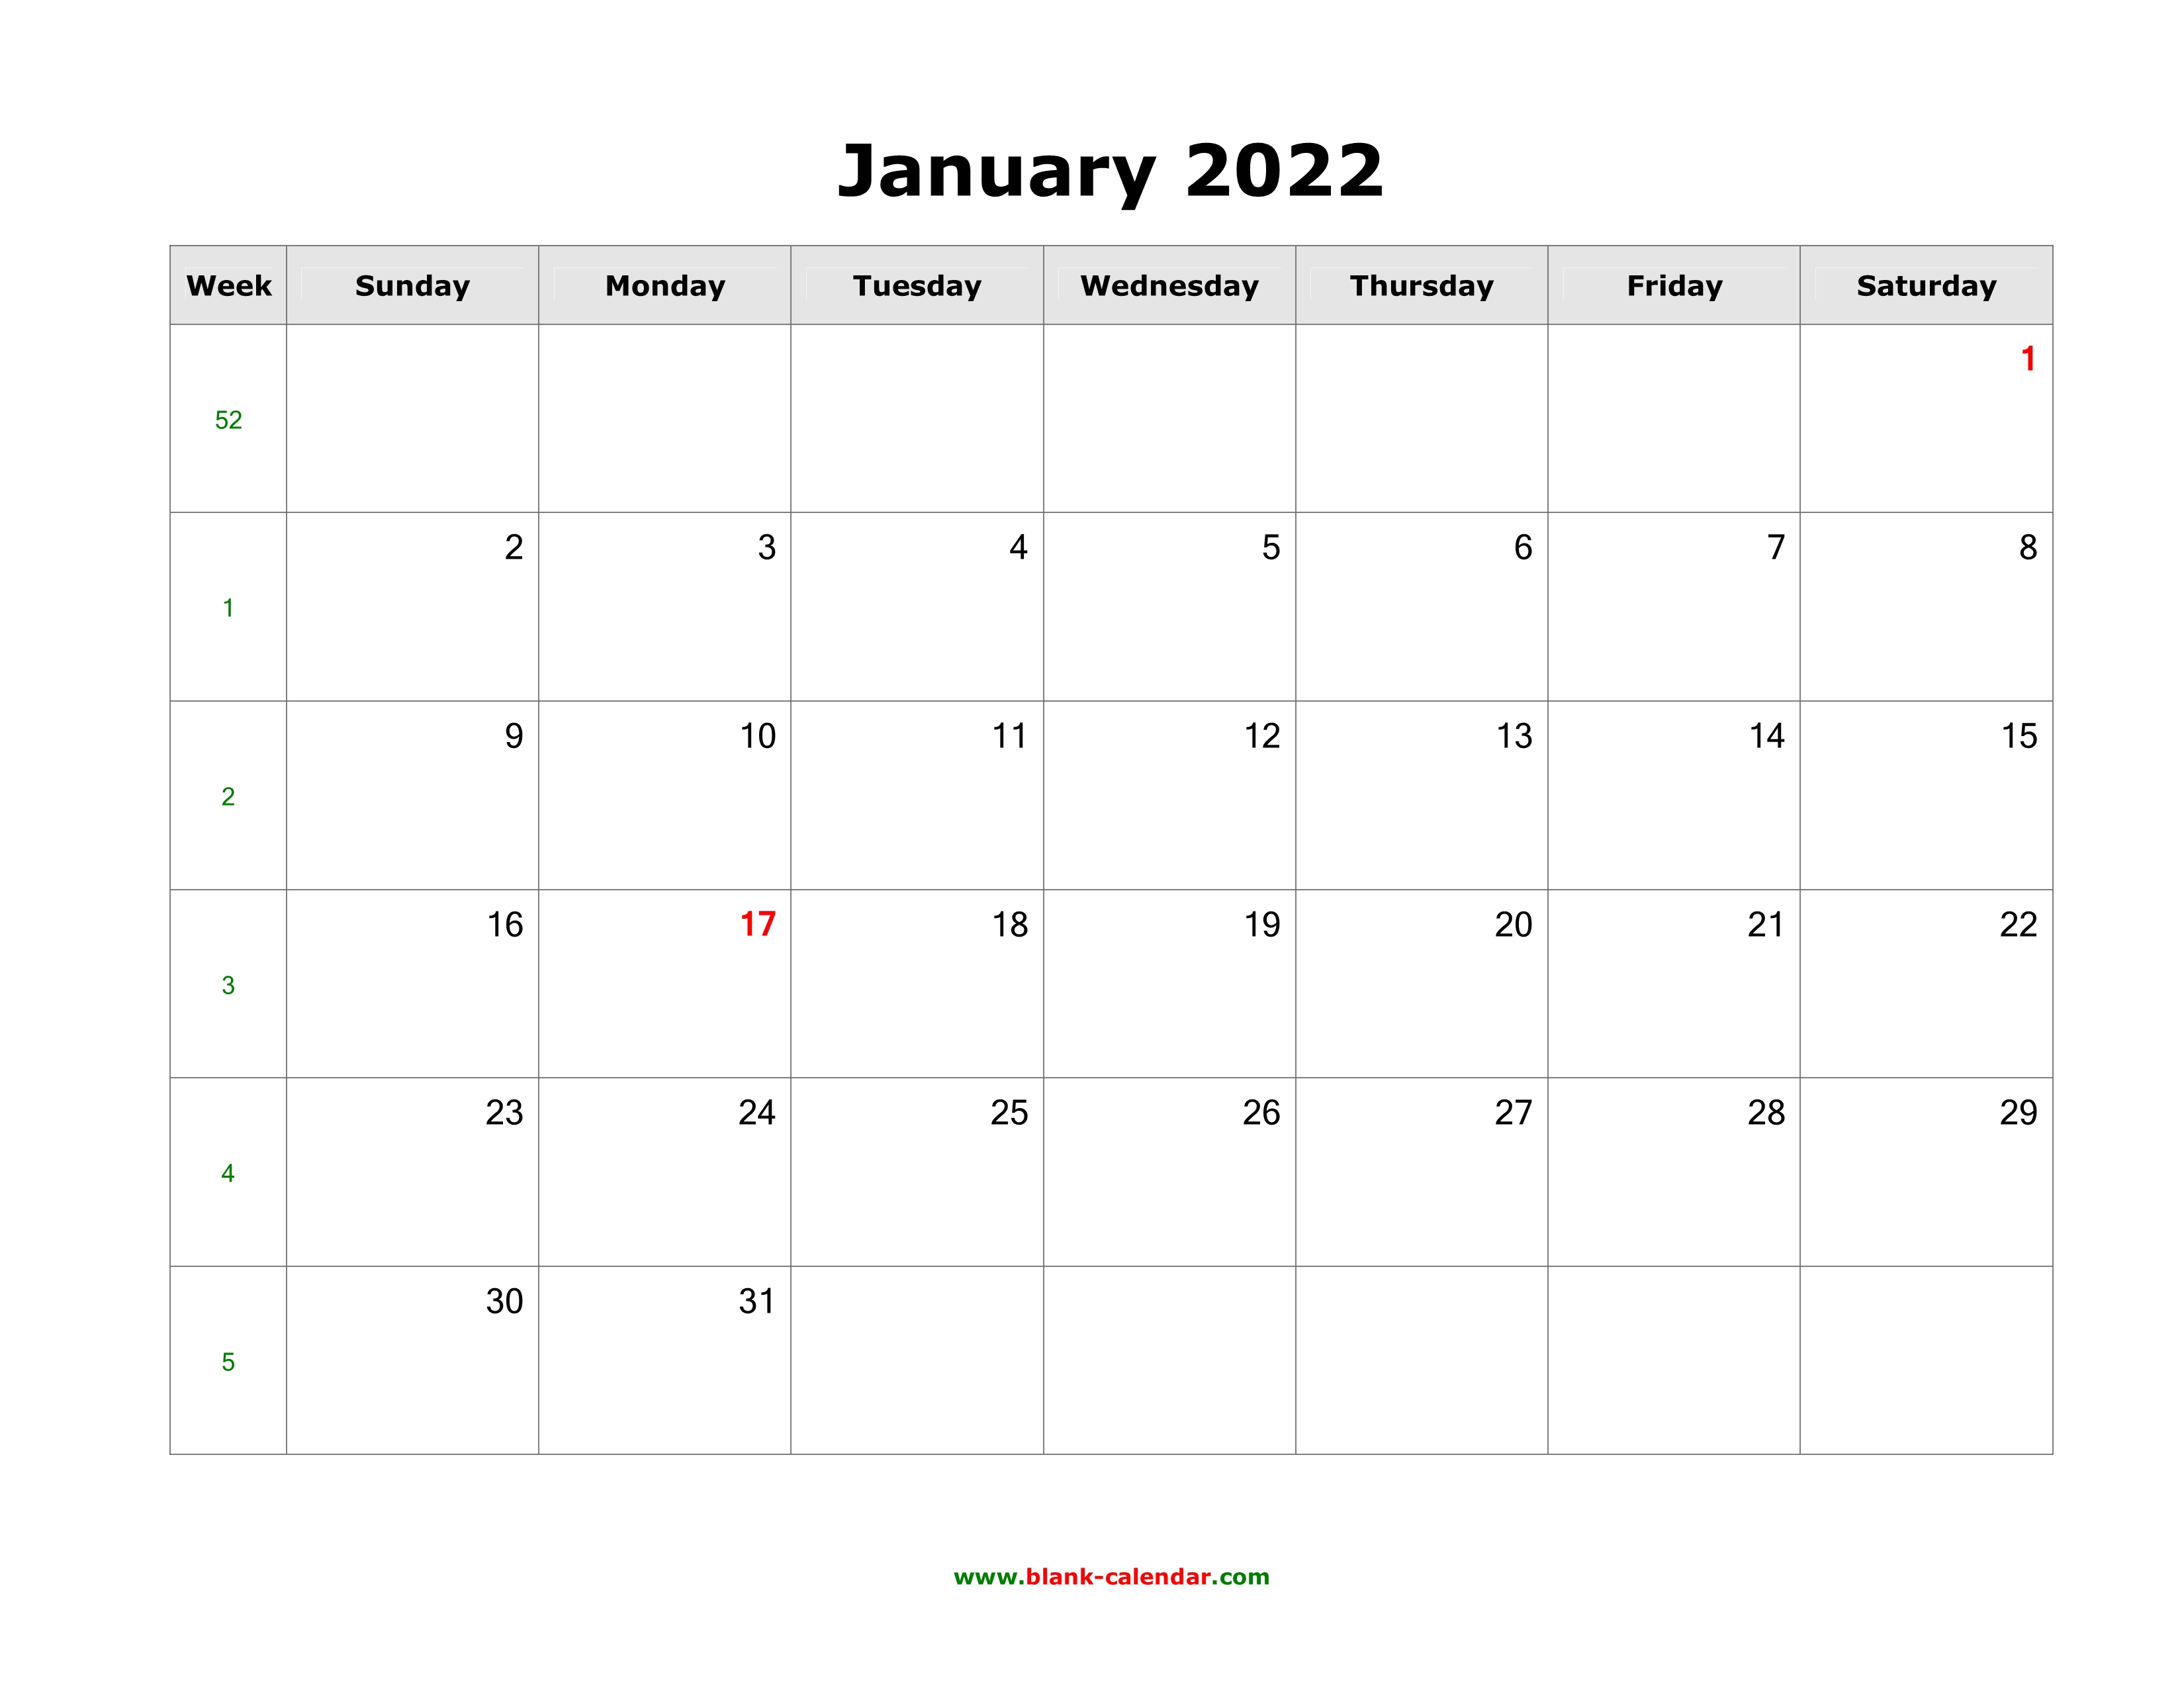 Print Blank Calendar 2022 Download Blank Calendar 2022 (12 Pages, One Month Per Page, Horizontal)